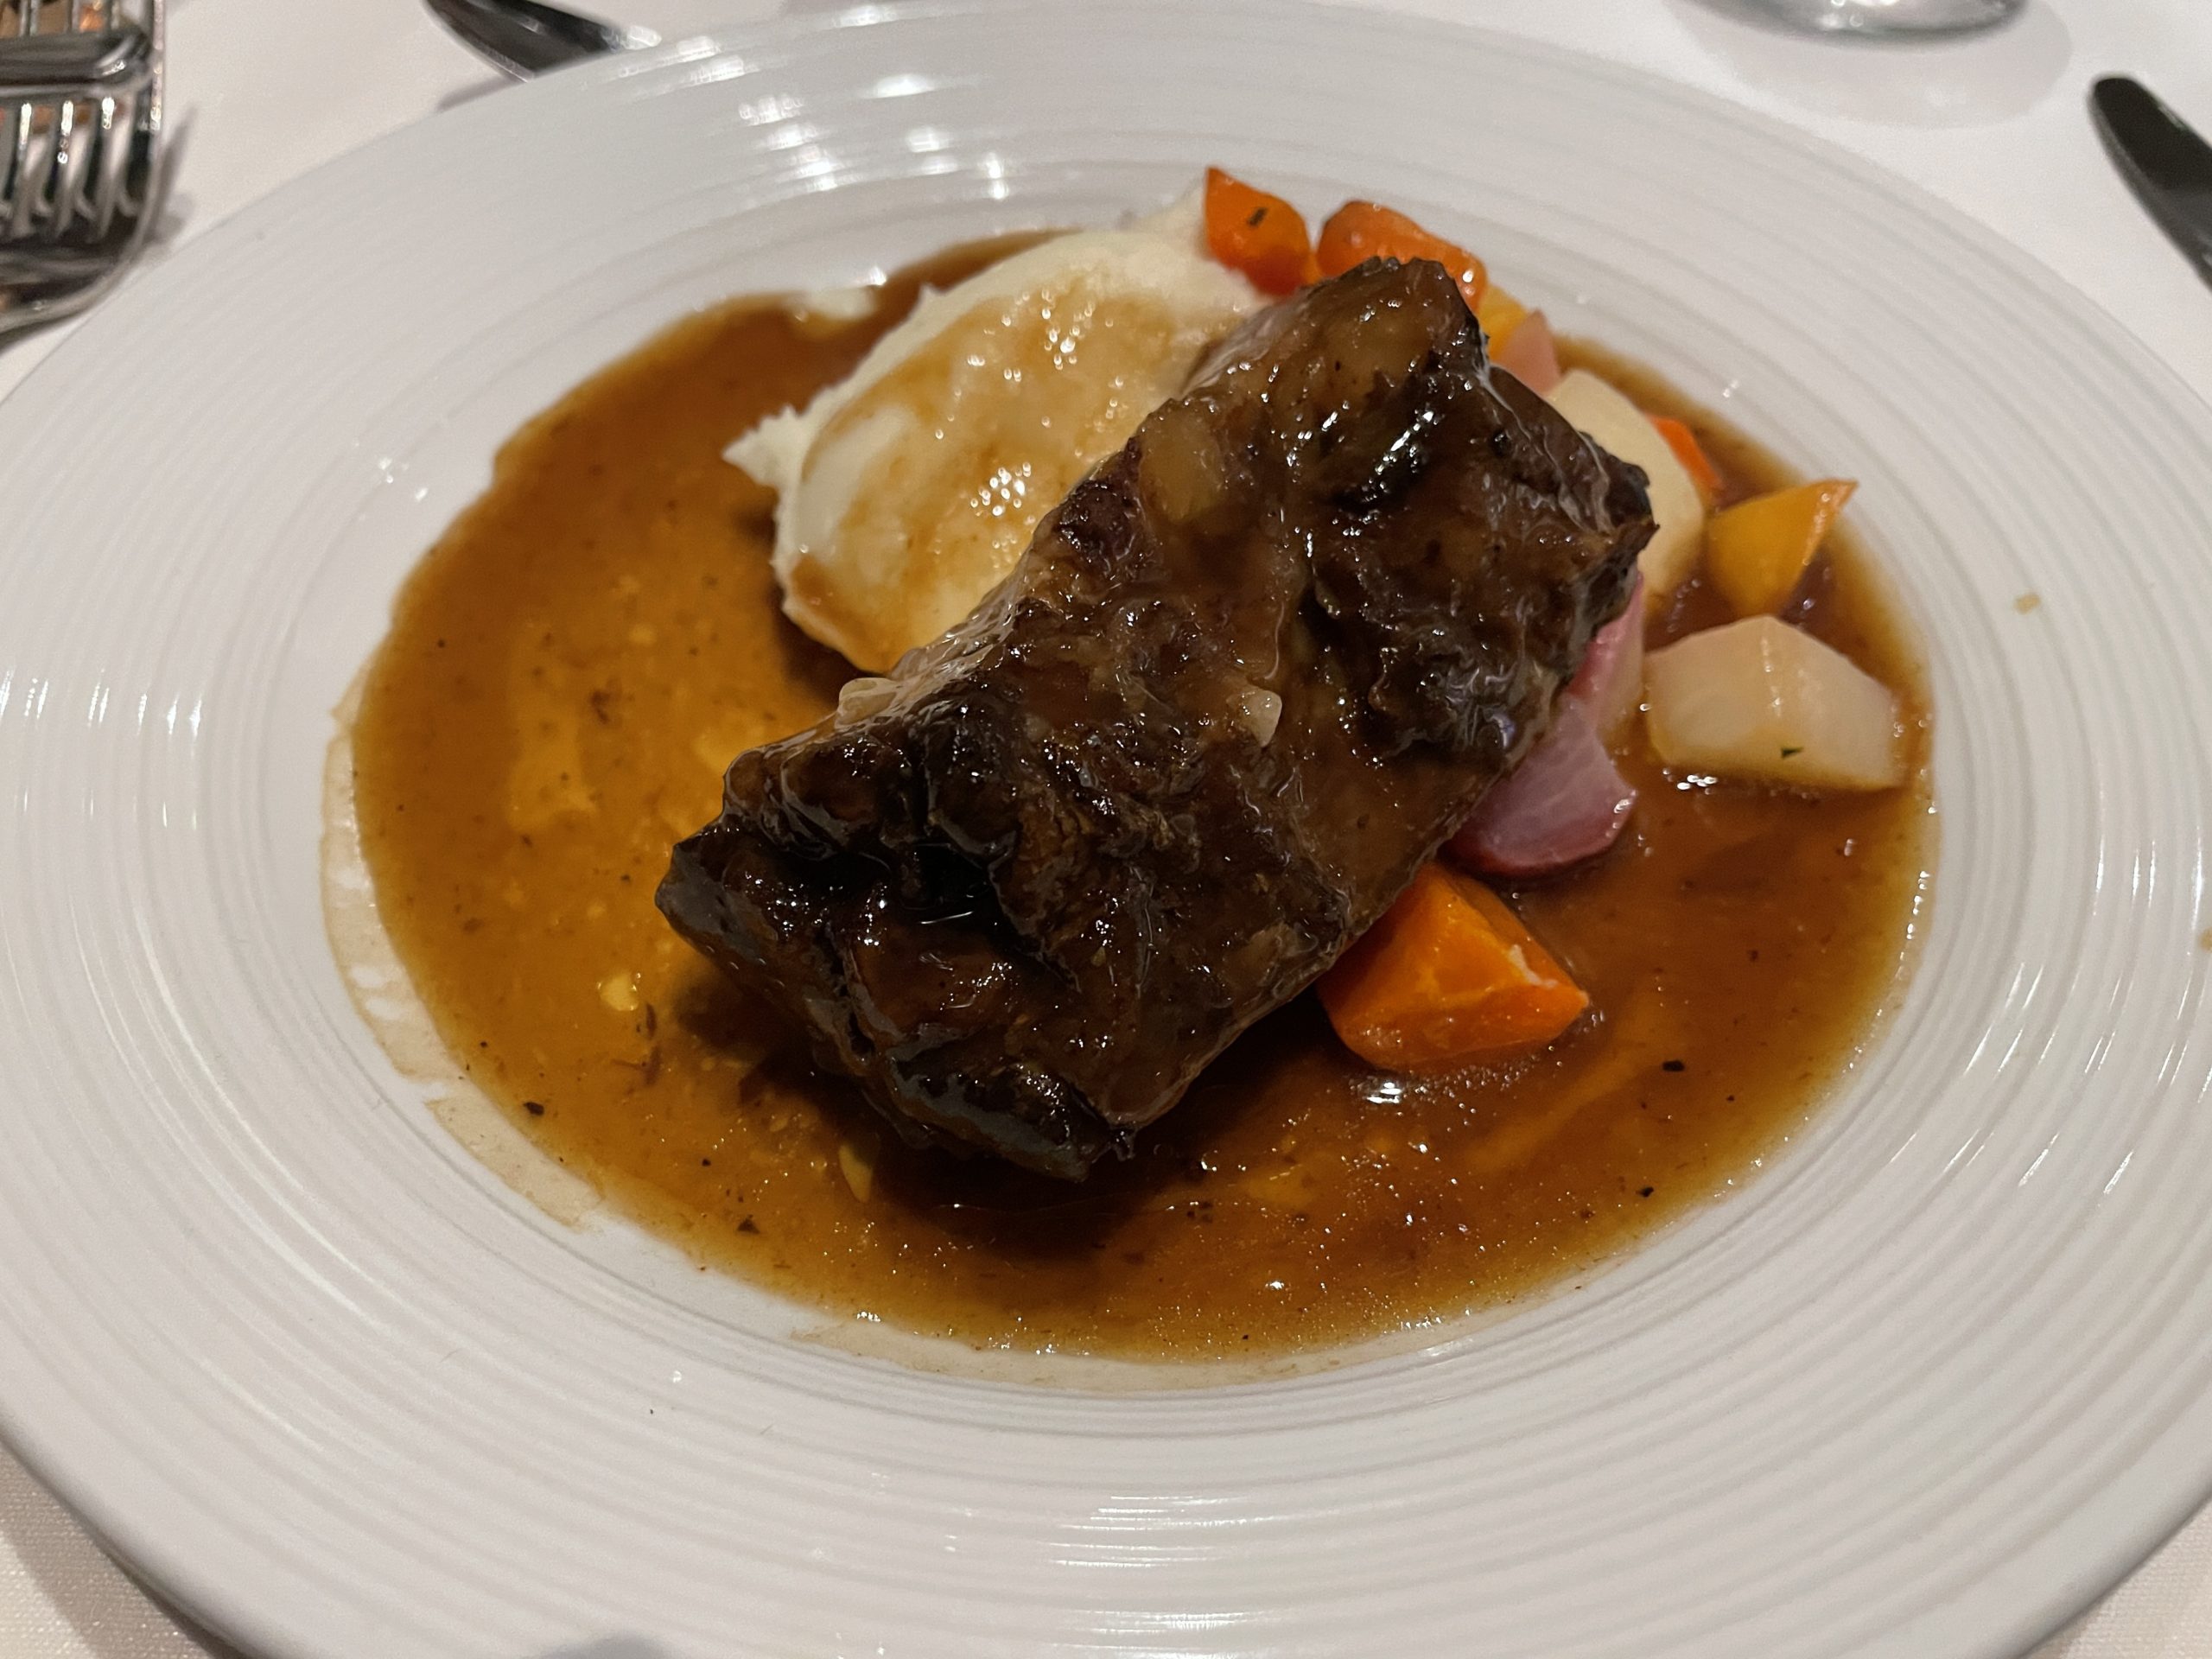 Main Dining Room Food included in price of Royal Caribbean cruise 